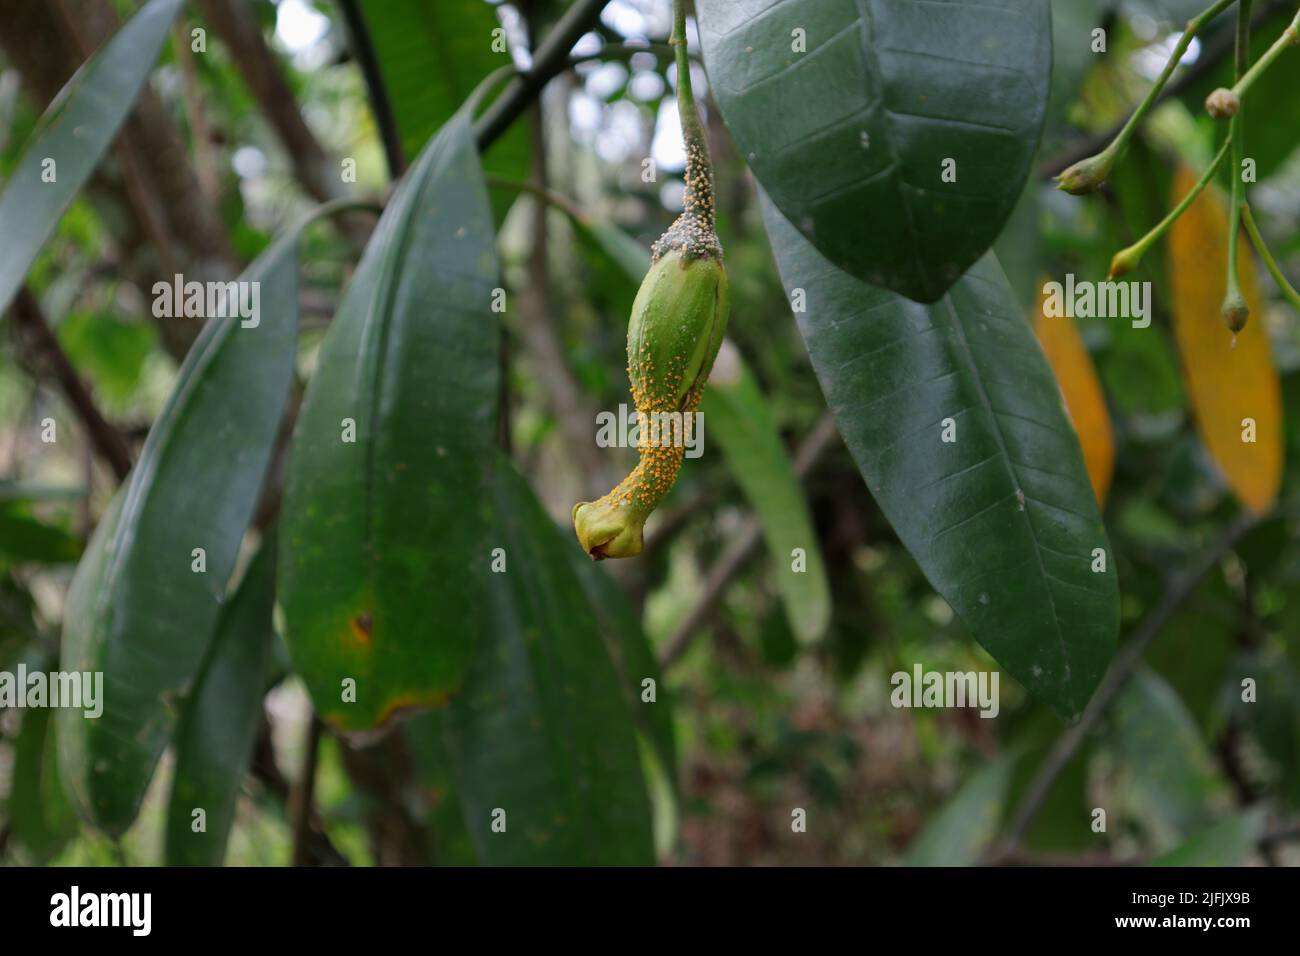 Close up of a weird shaped and mutated Eve's Apple or Forbidden fruit (Divi Kaduru) hangs under the branch with leaves Stock Photo